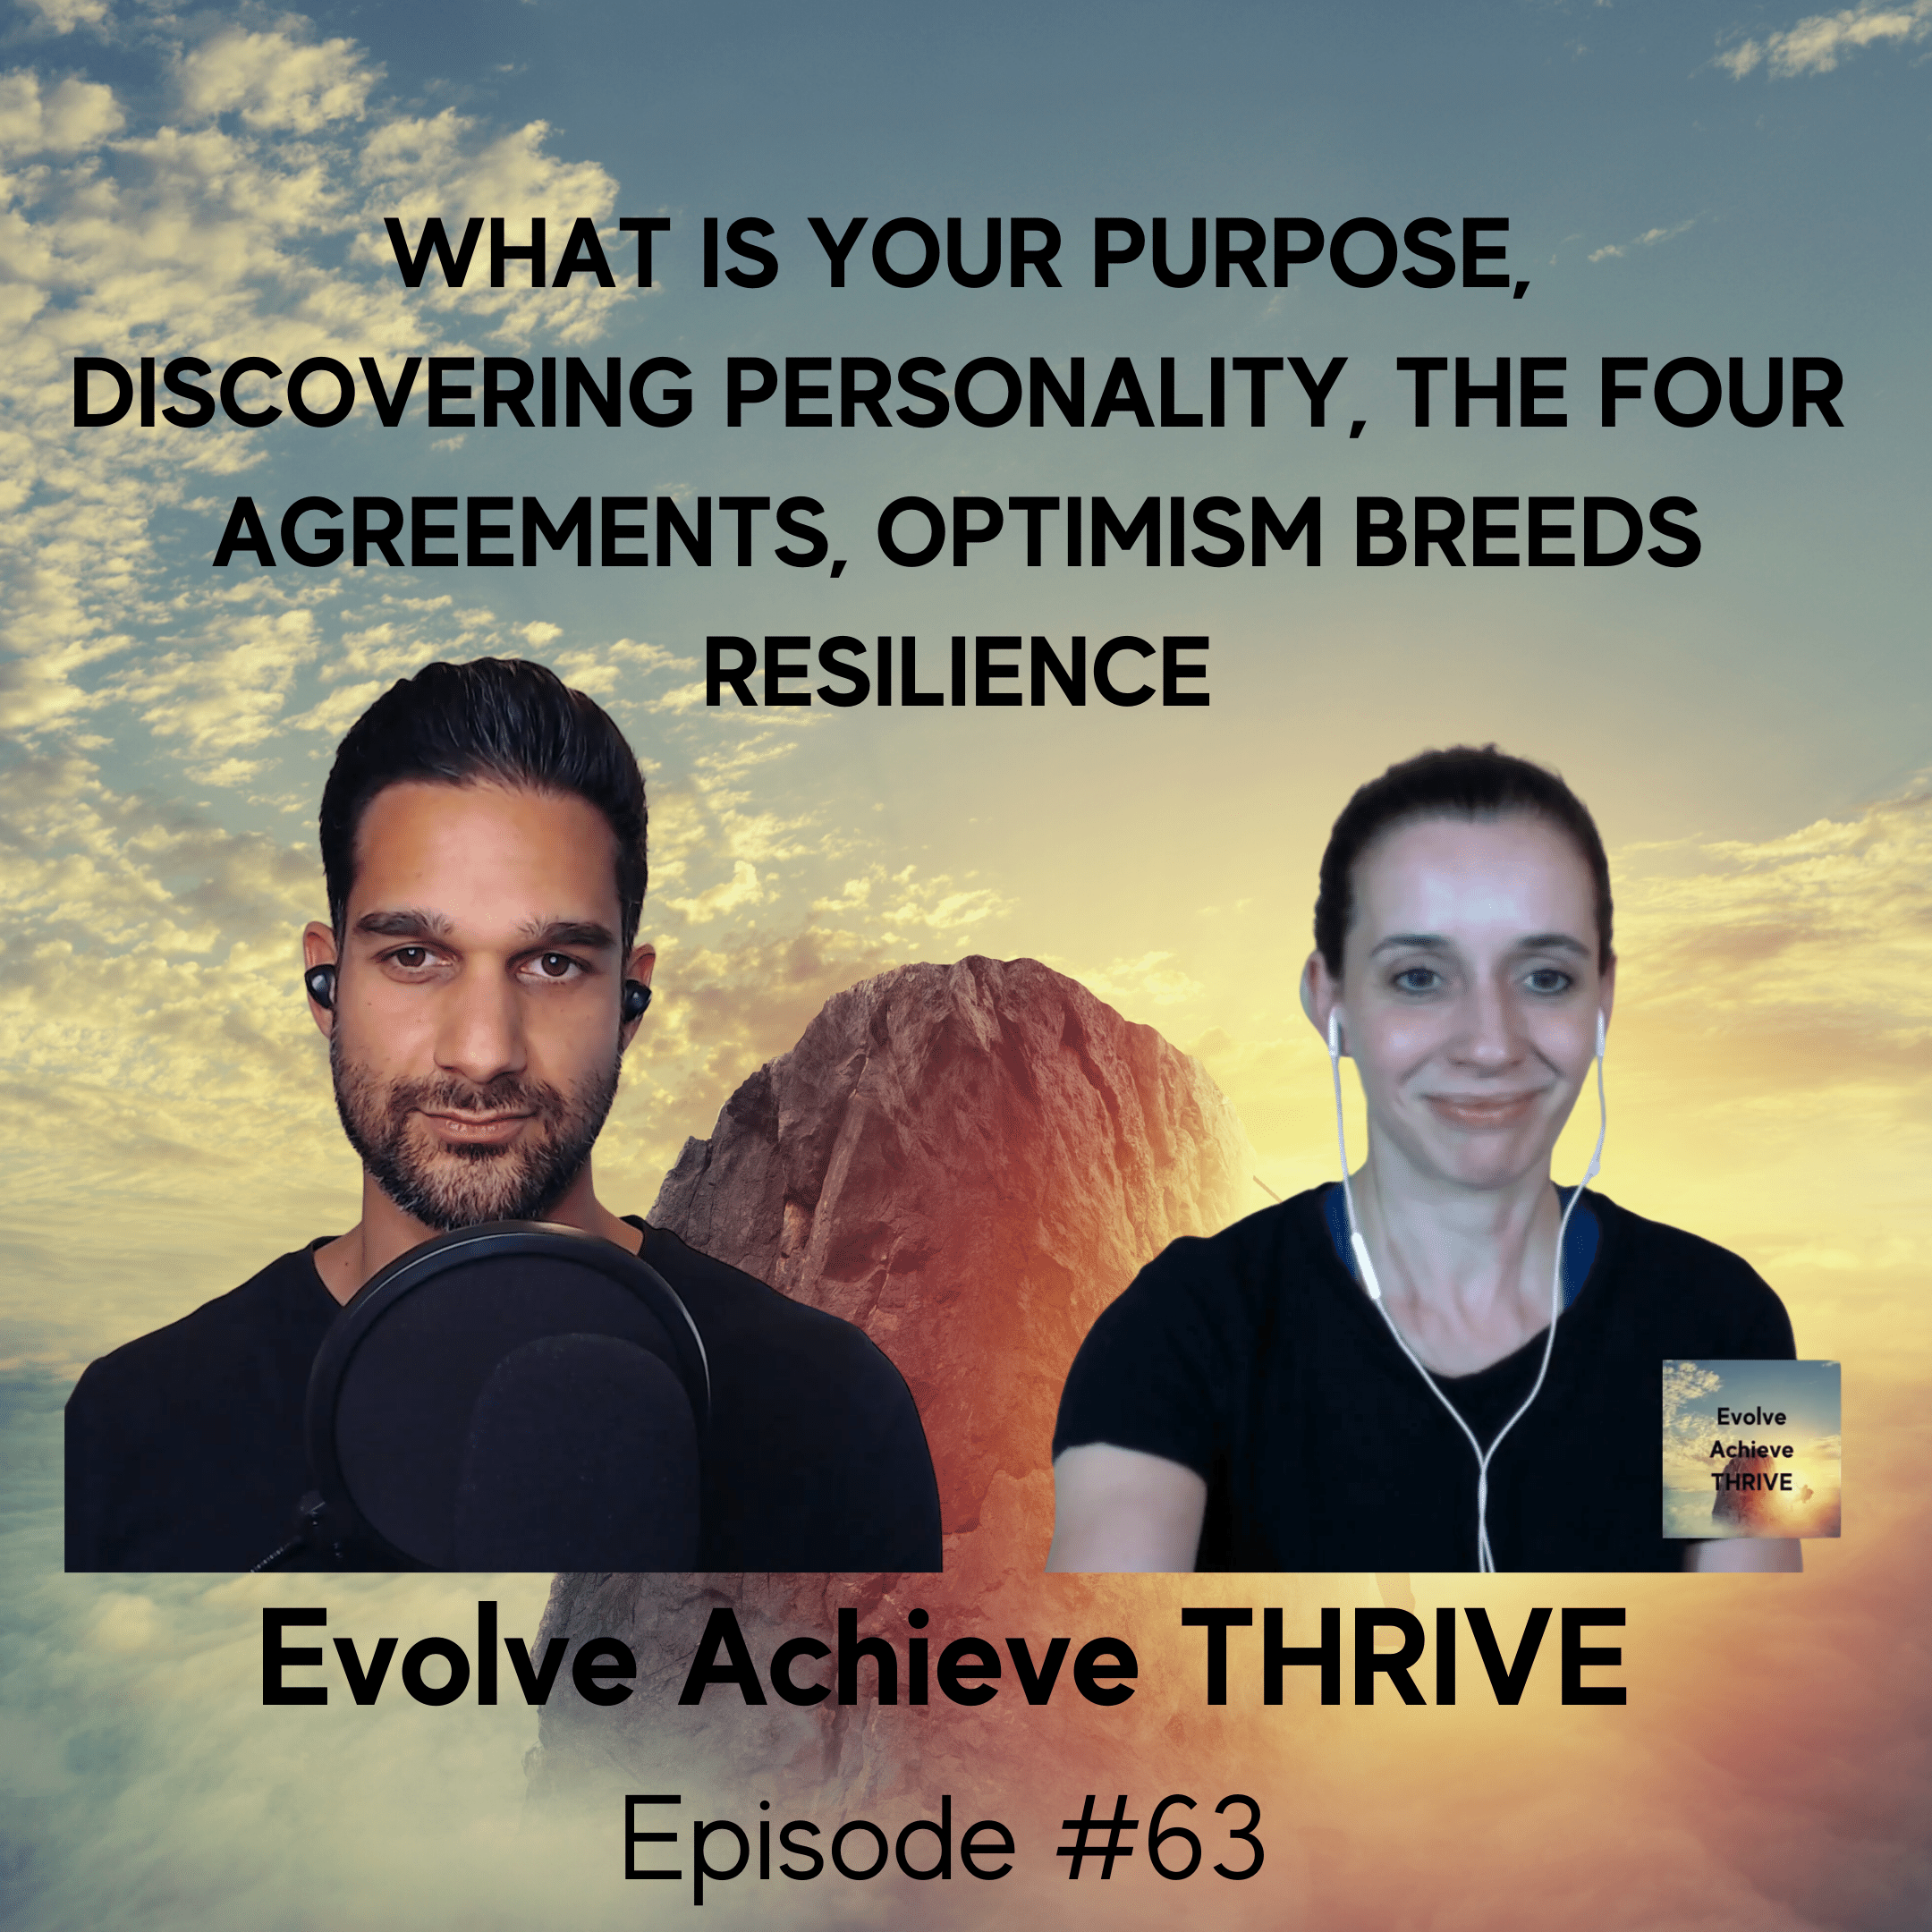 #63 What is Your Purpose? Discovering Personality, The Four Agreements, Optimism Breeds Resilience